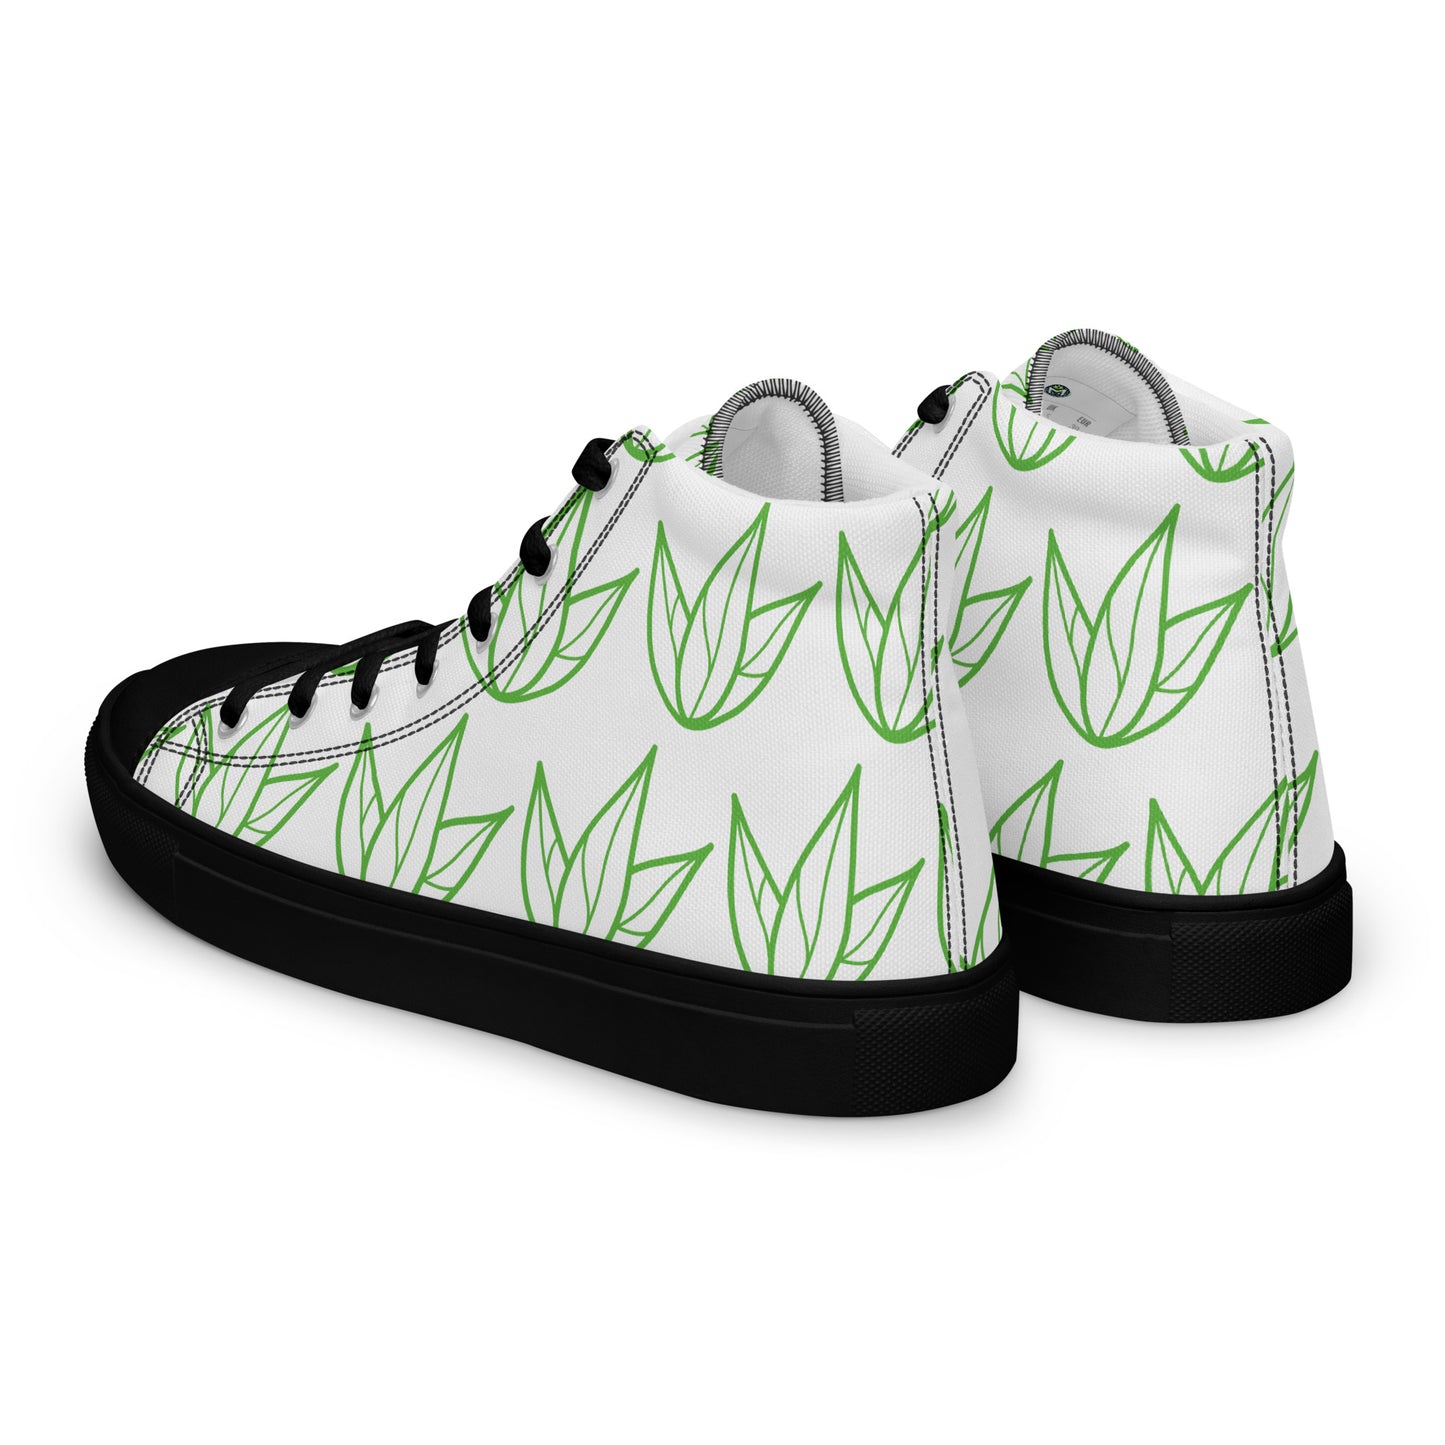 VIbrant Visions - Organic Health & Wellness - Men’s HD Printed, high top canvas shoes, Gym Shoes, Sneakers, High top Shoes